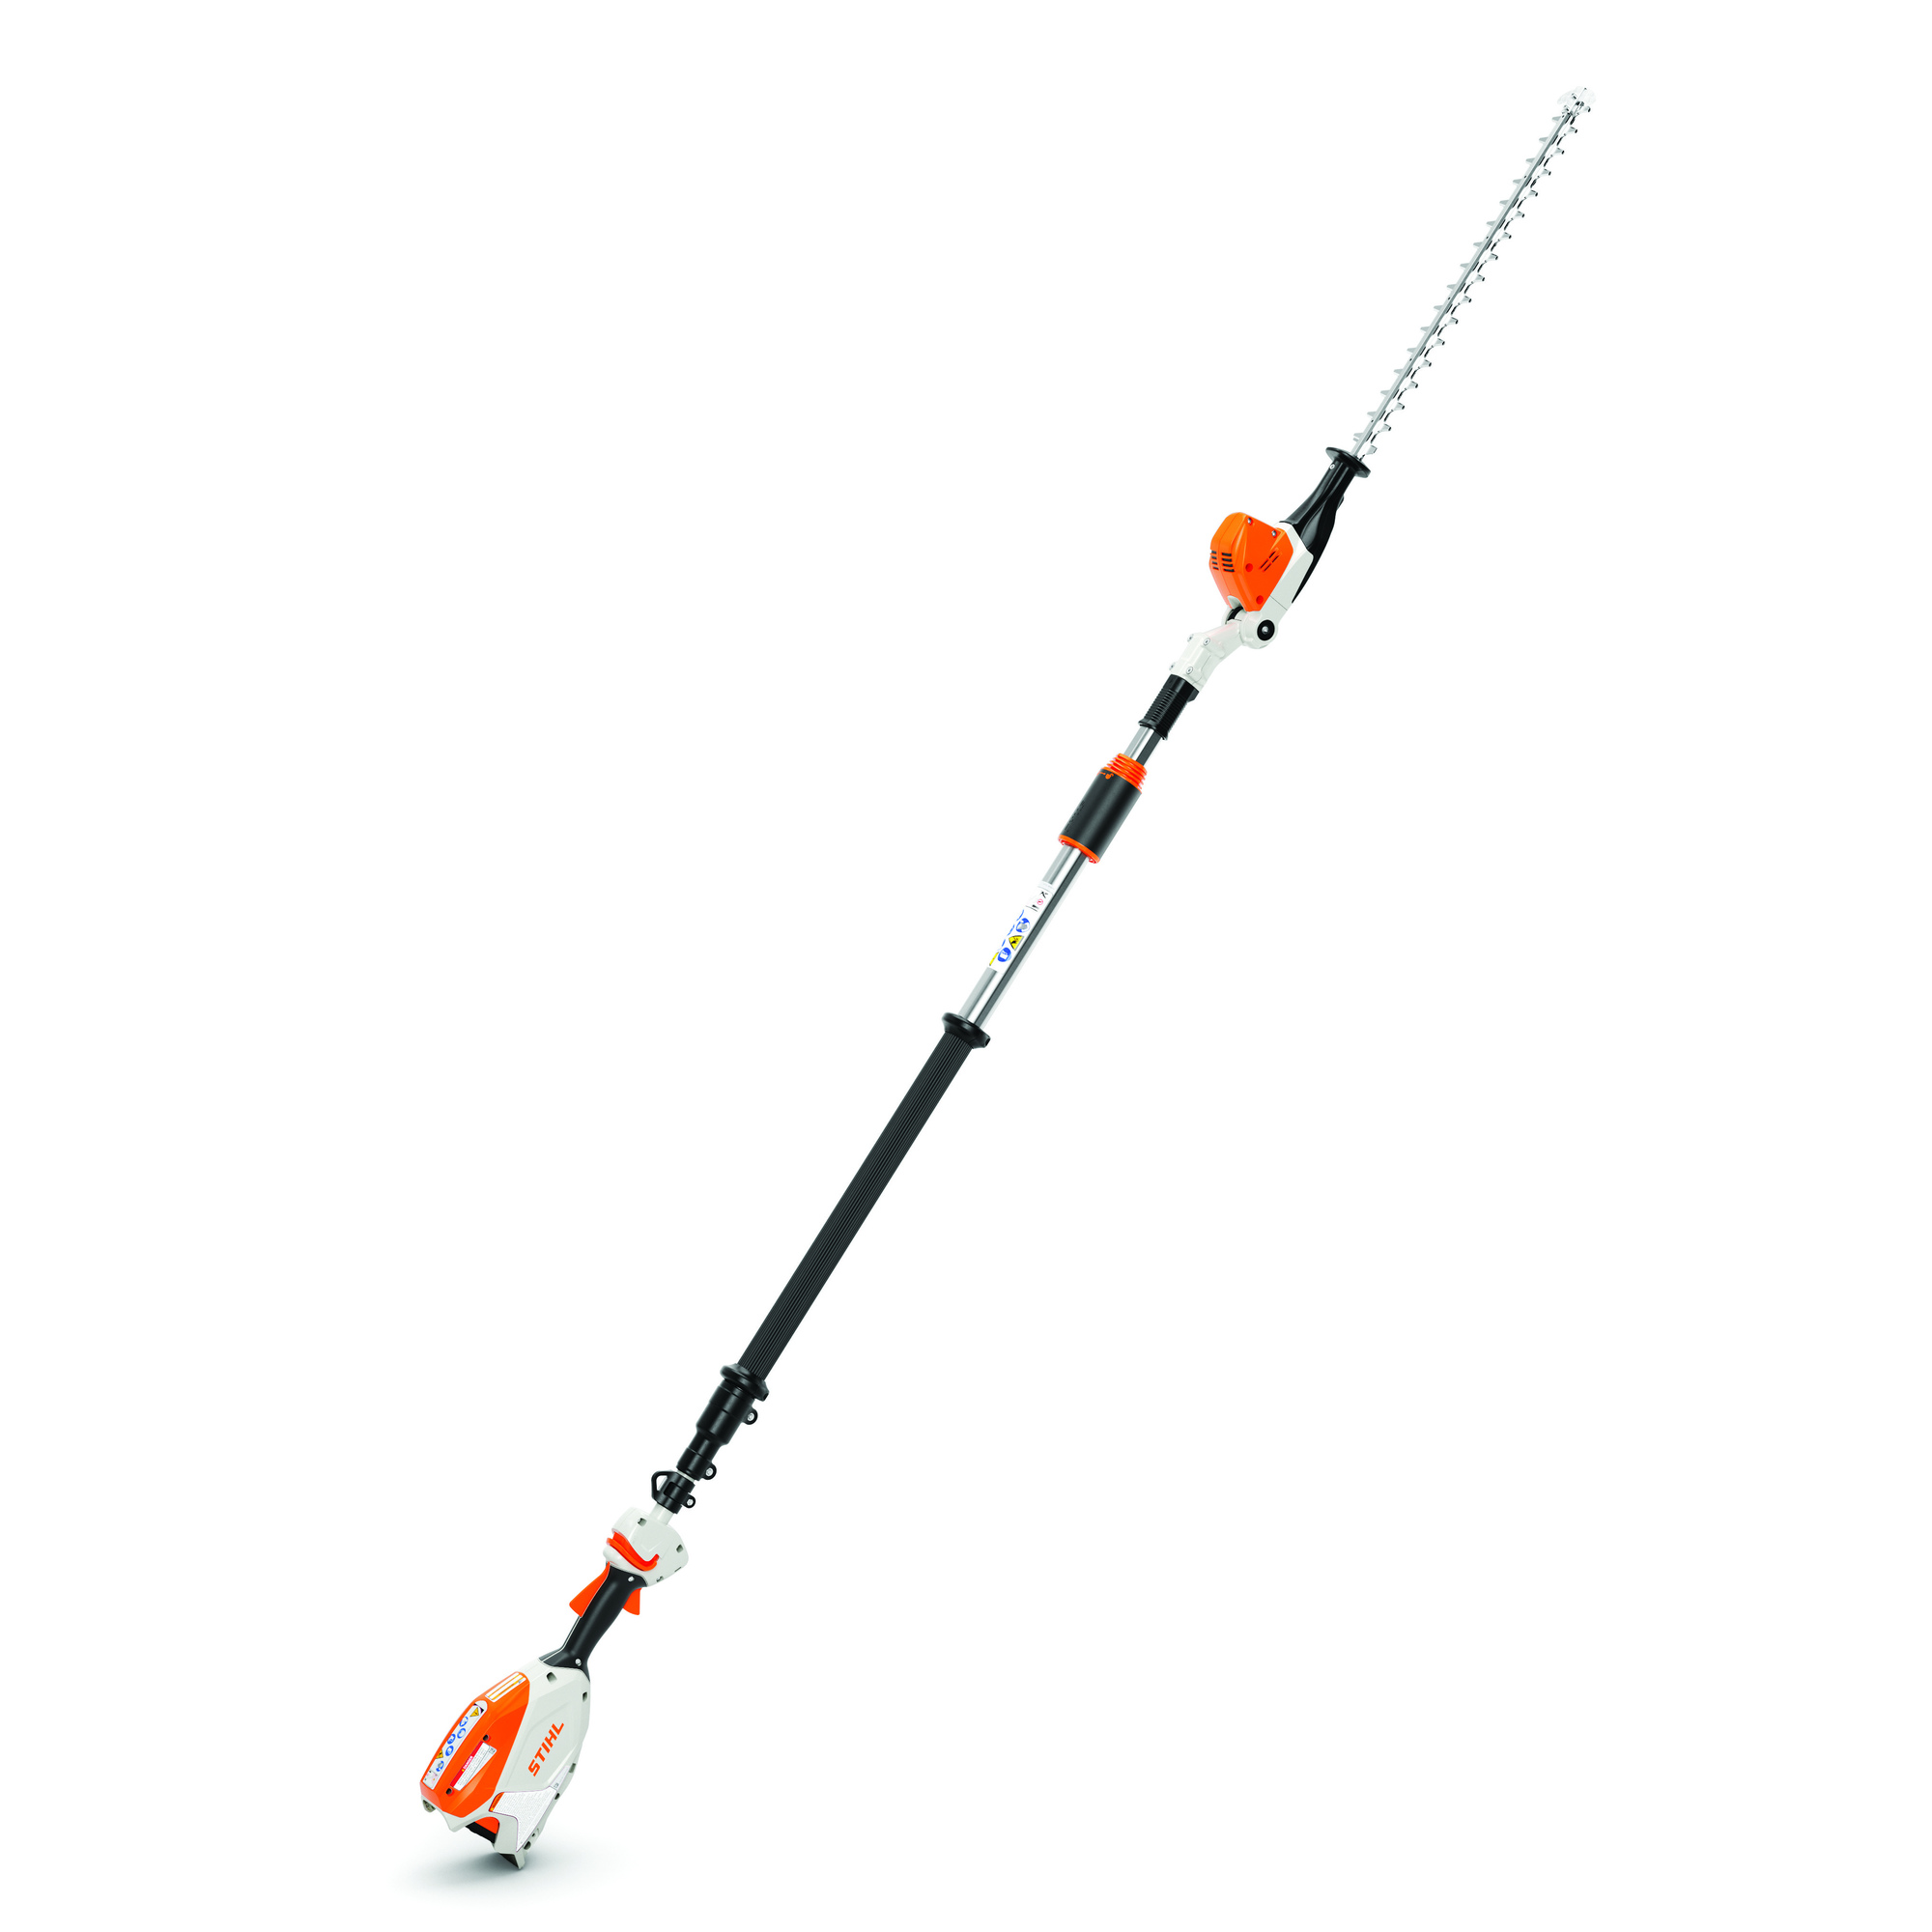 Stihl, AP Series Extended Reach Hedge Trimmer, Blade Length 20 in, Model HLA 86